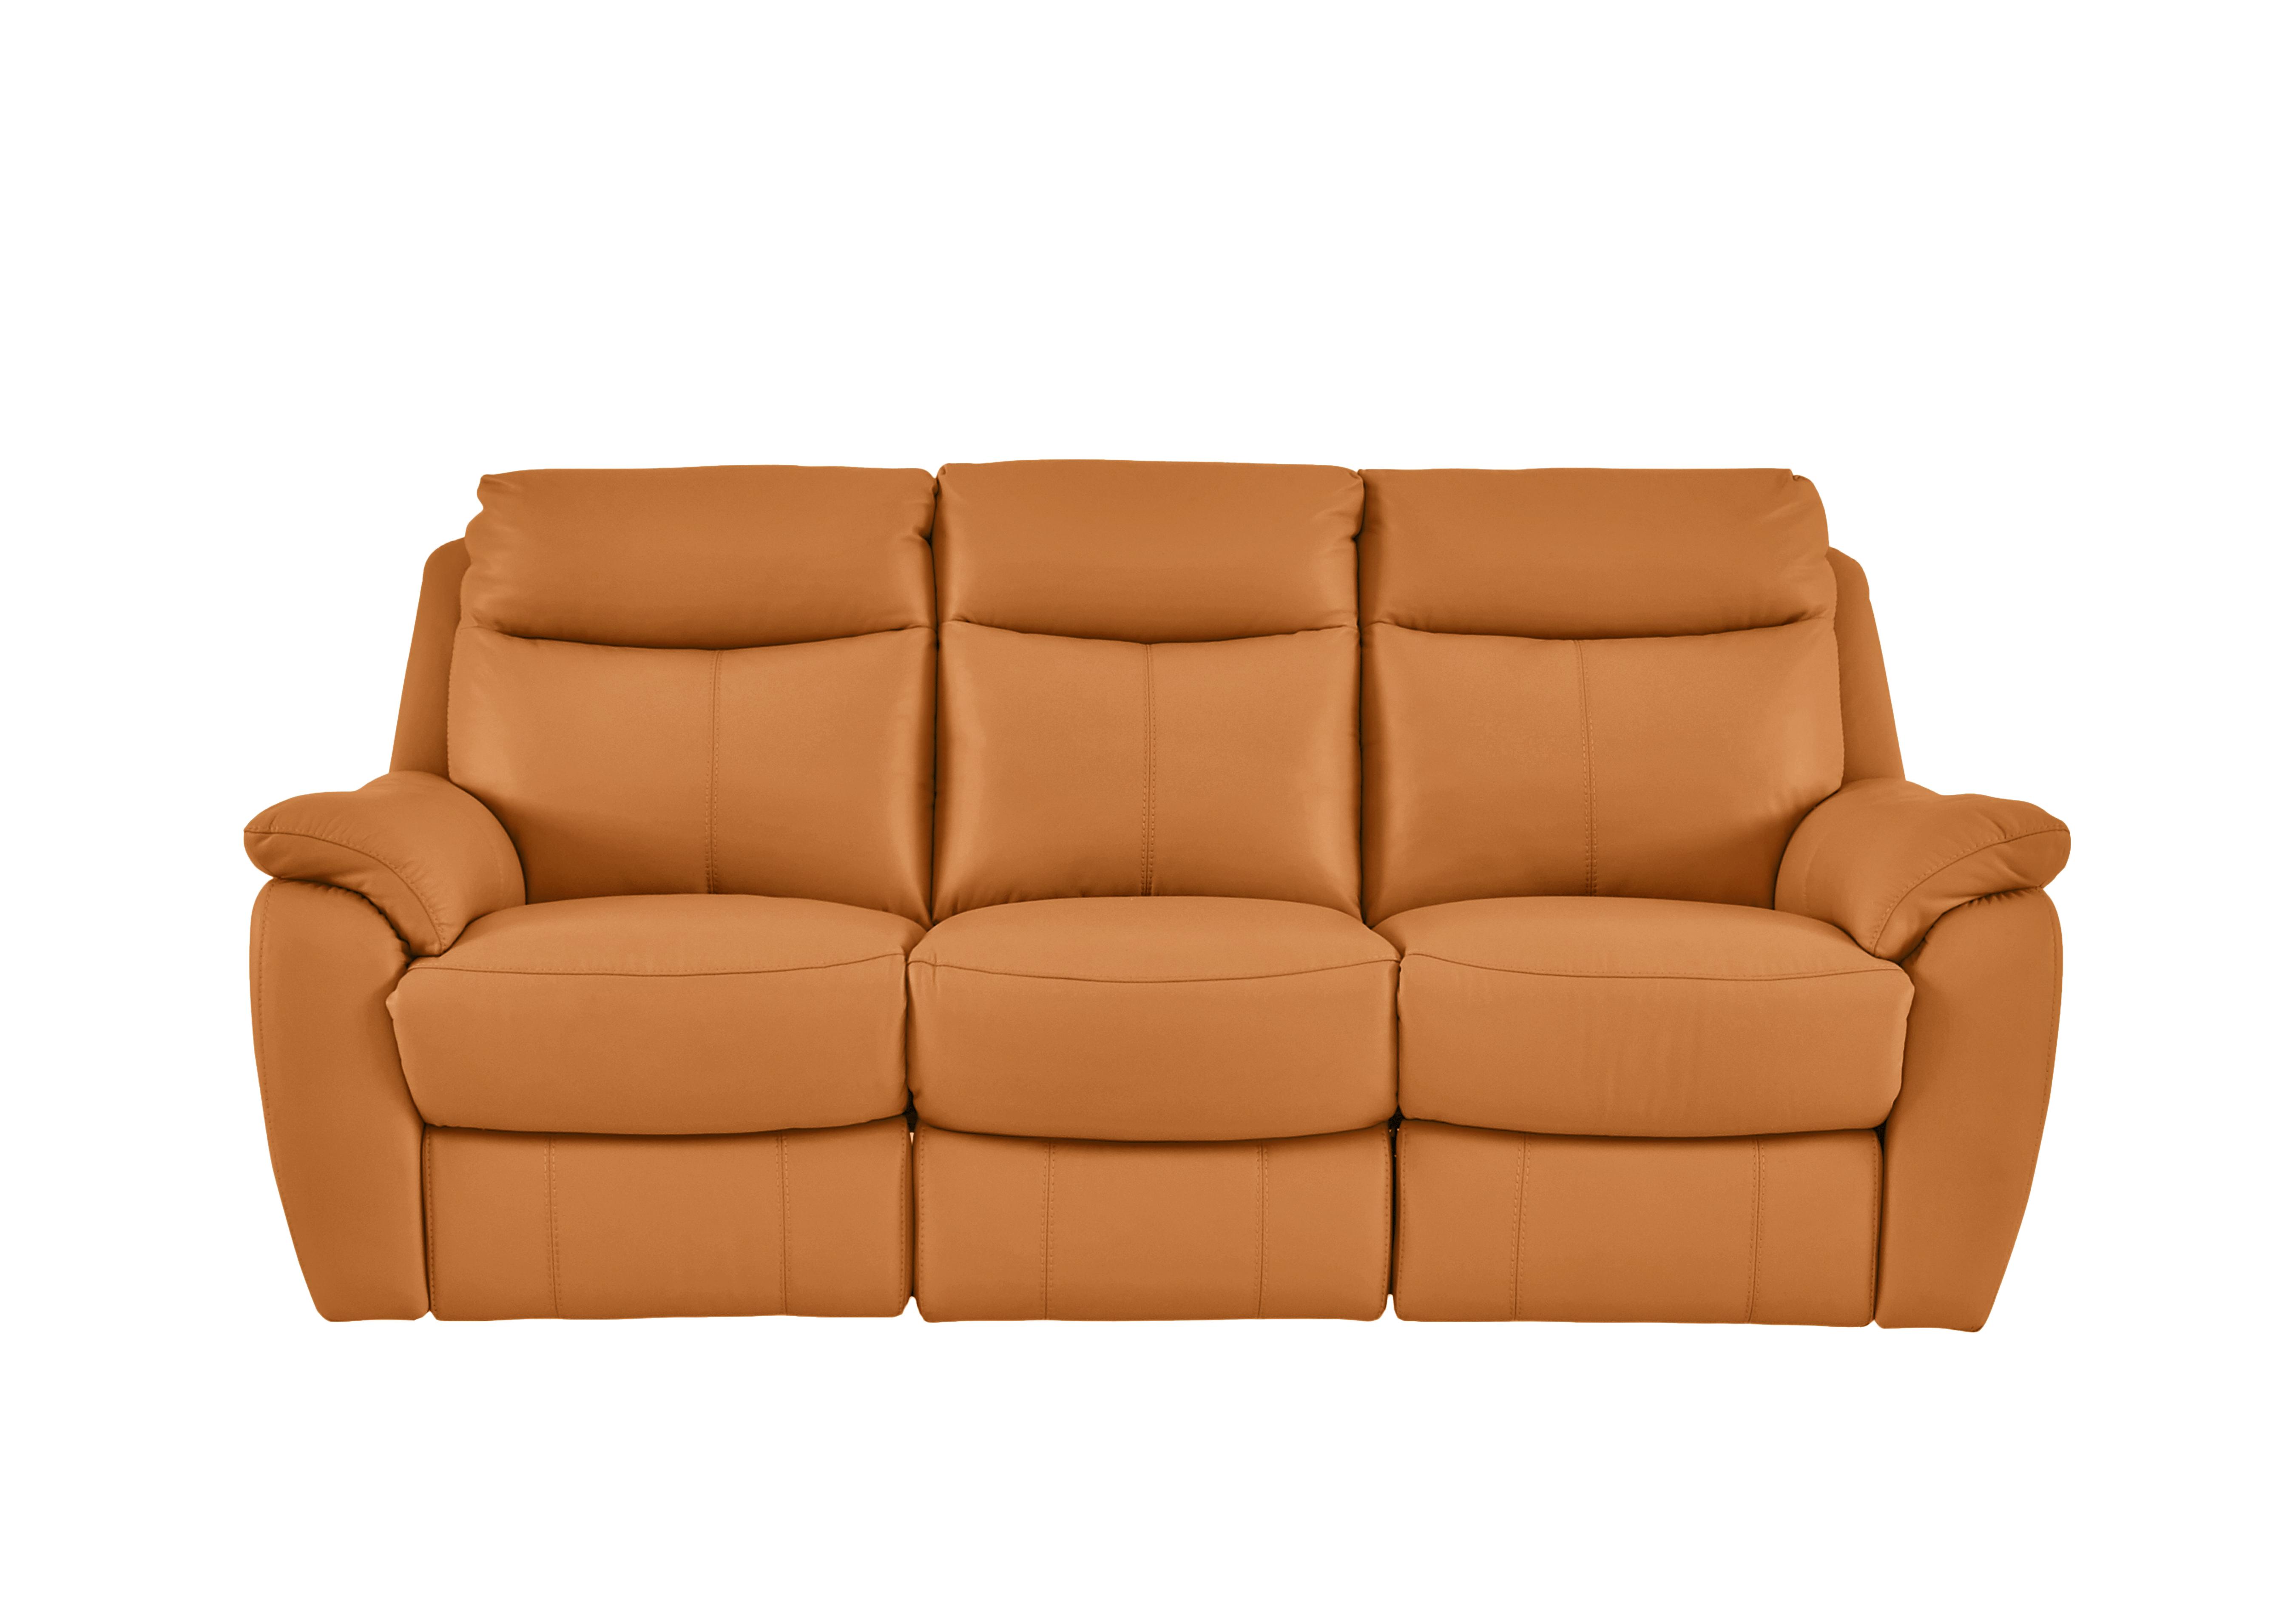 Snug 3 Seater Leather Sofa in Bv-335e Honey Yellow on Furniture Village